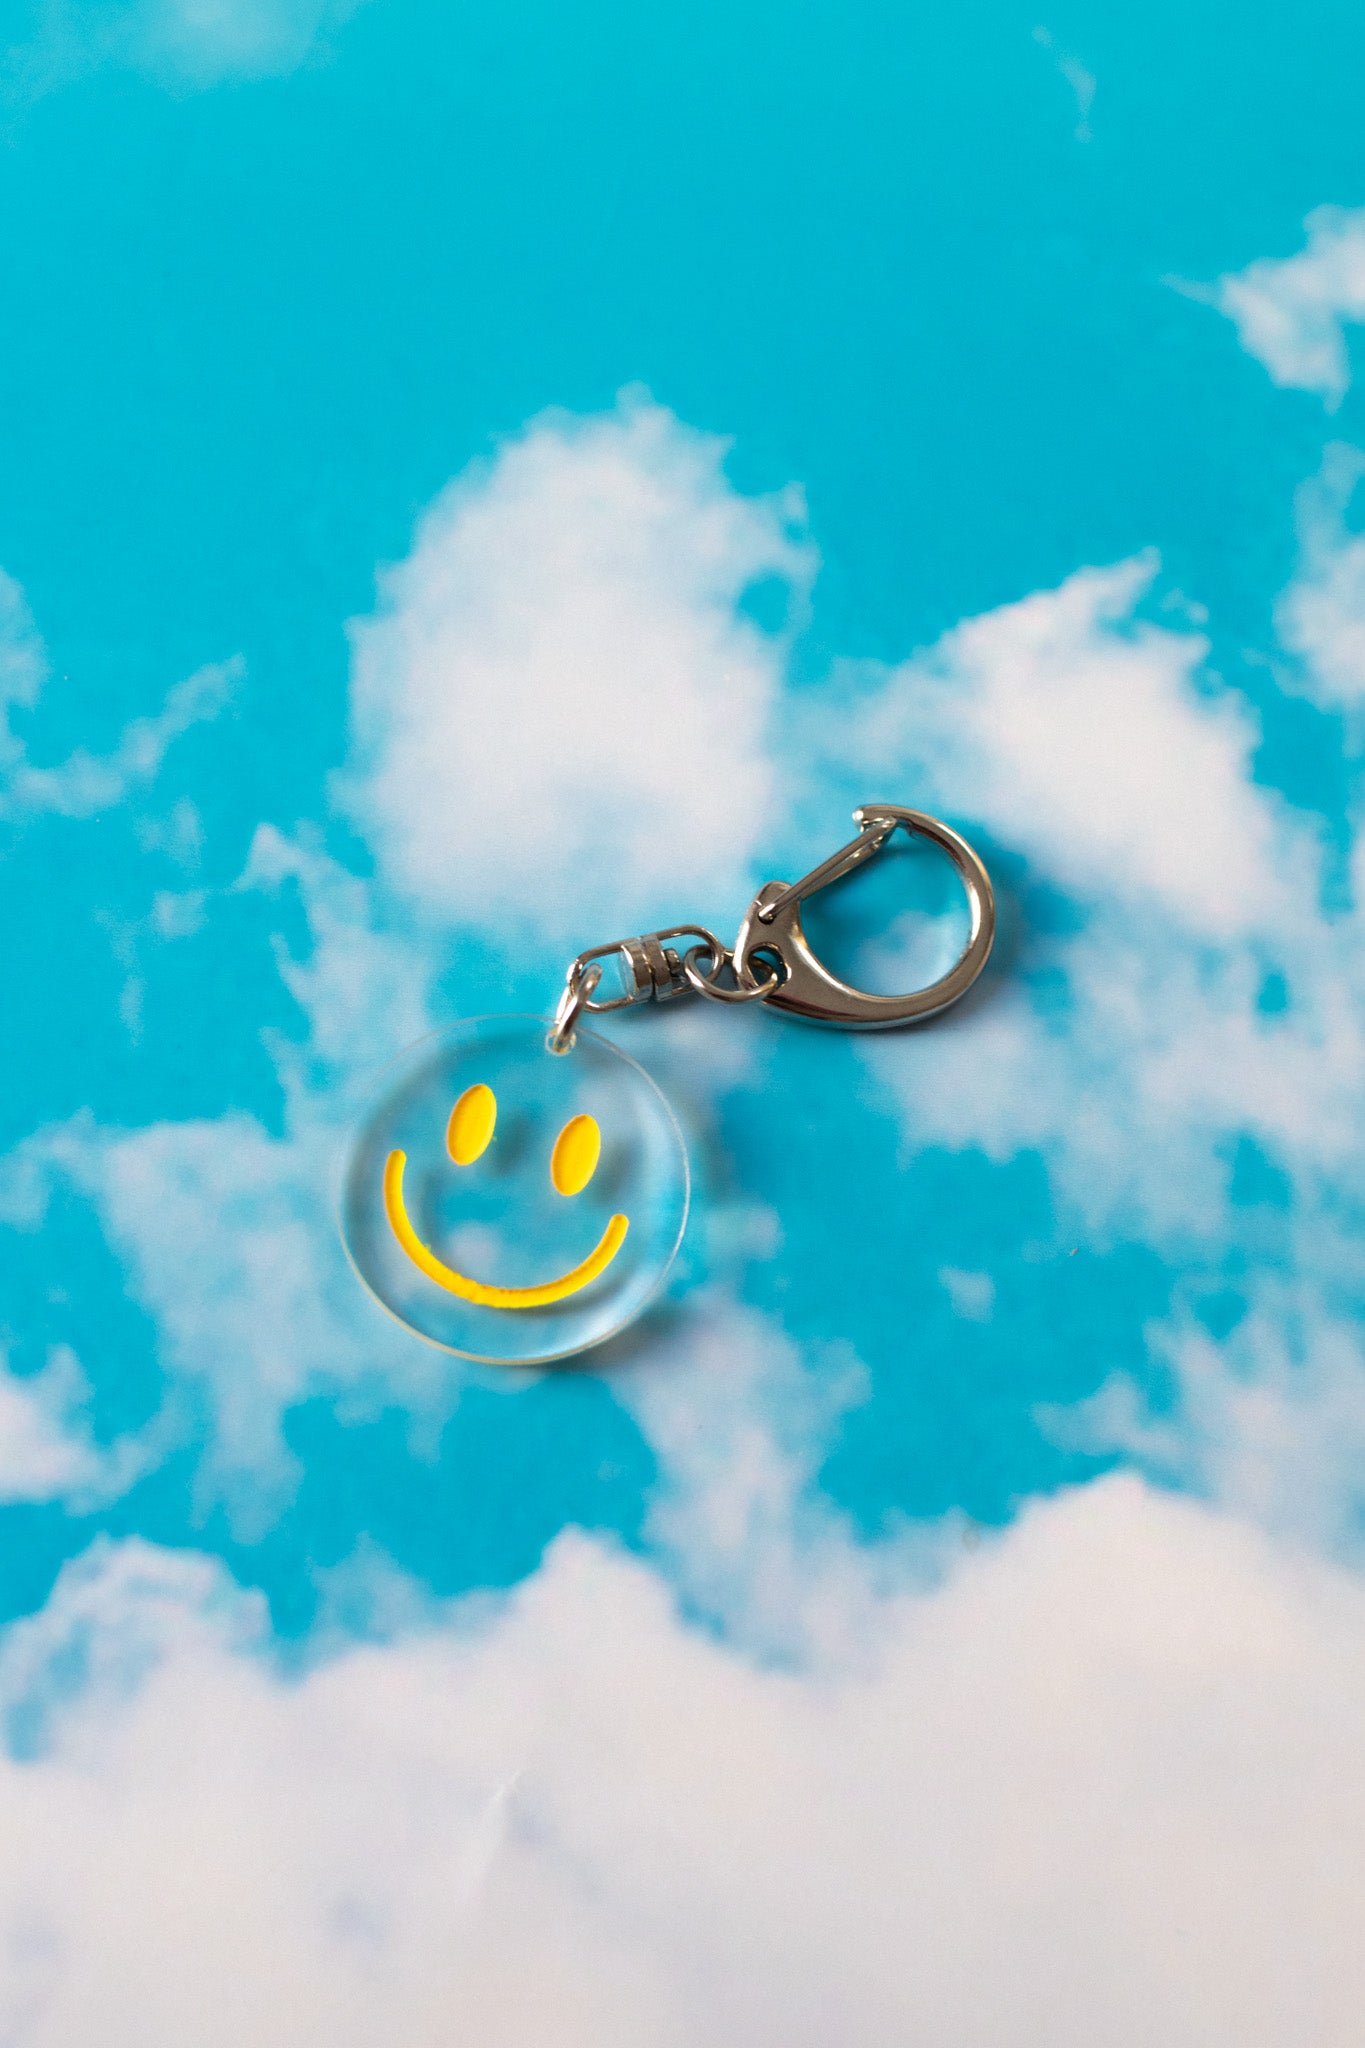 Smiley face keychain